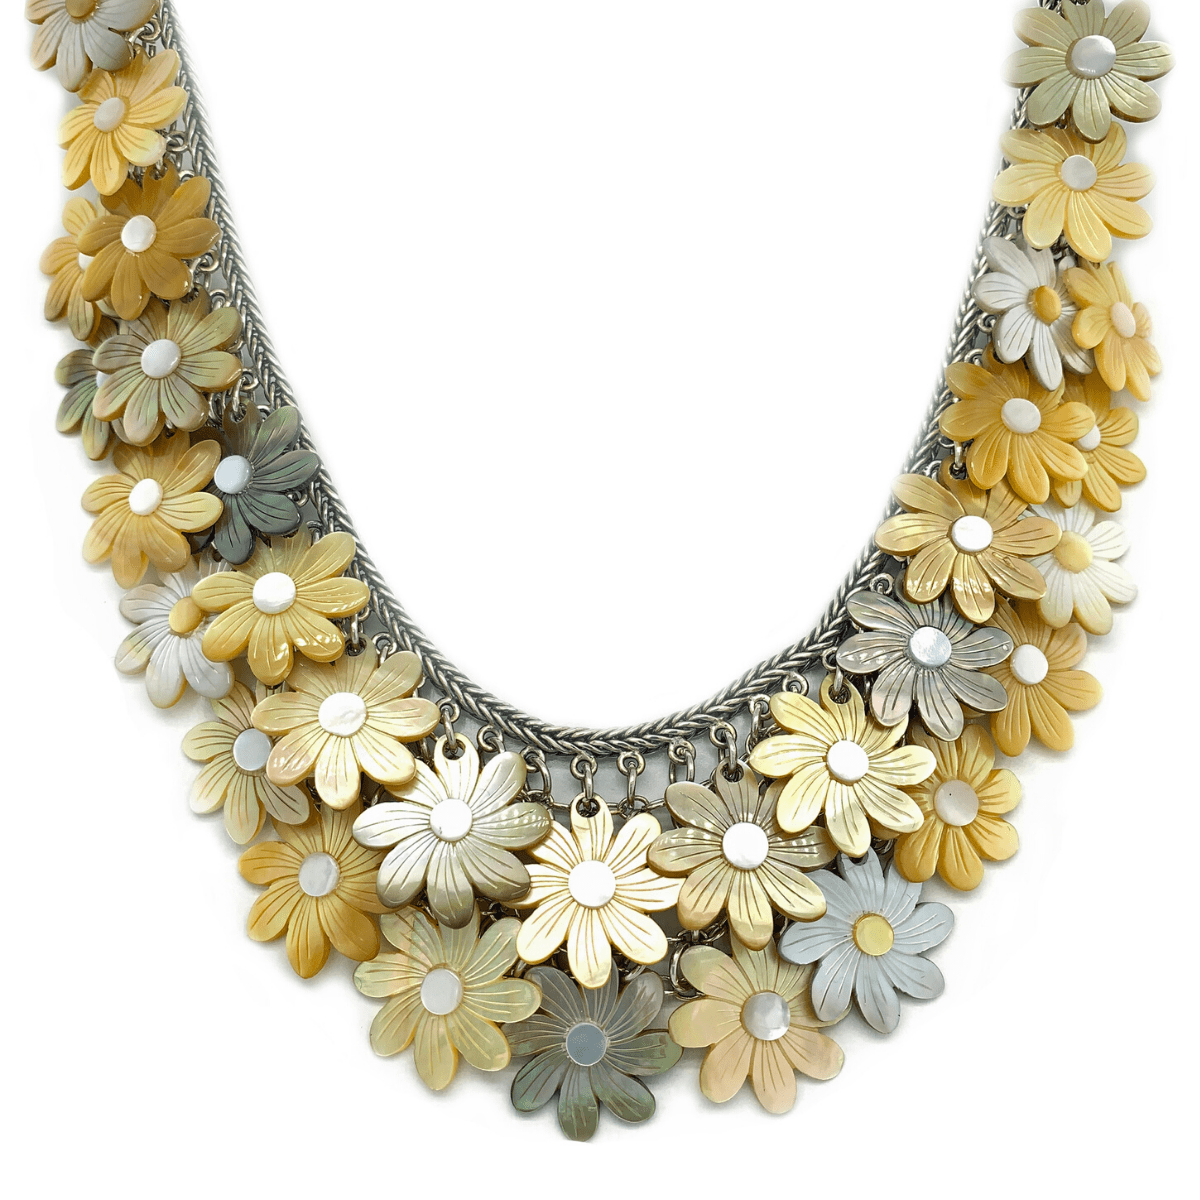 Mother-of-Pearl Daisies &amp; Sterling Silver Mesh Necklace - Qinti - The Peruvian Shop